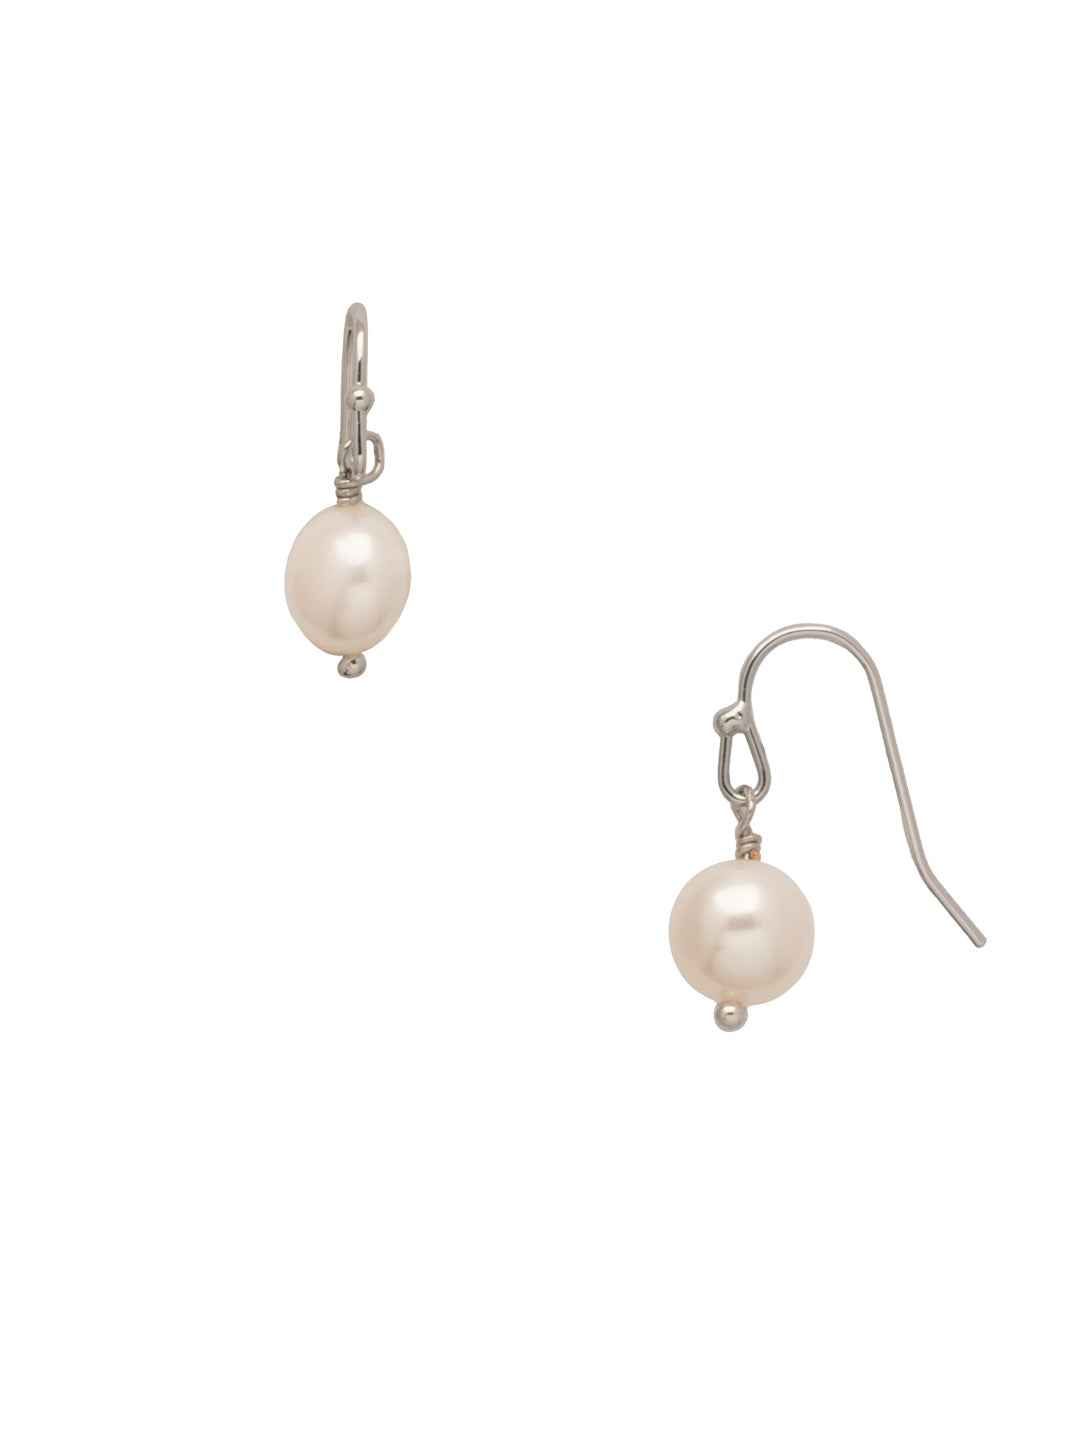 Tae Dangle Earring - 4EEP42PDMDP - <p>The Tae Dangle Earrings are the perfect wardrobe staple. A single modern freshwater pearl hangs delicately from a French wire to create a timeless piece. From Sorrelli's Modern Pearl collection in our Palladium finish.</p>